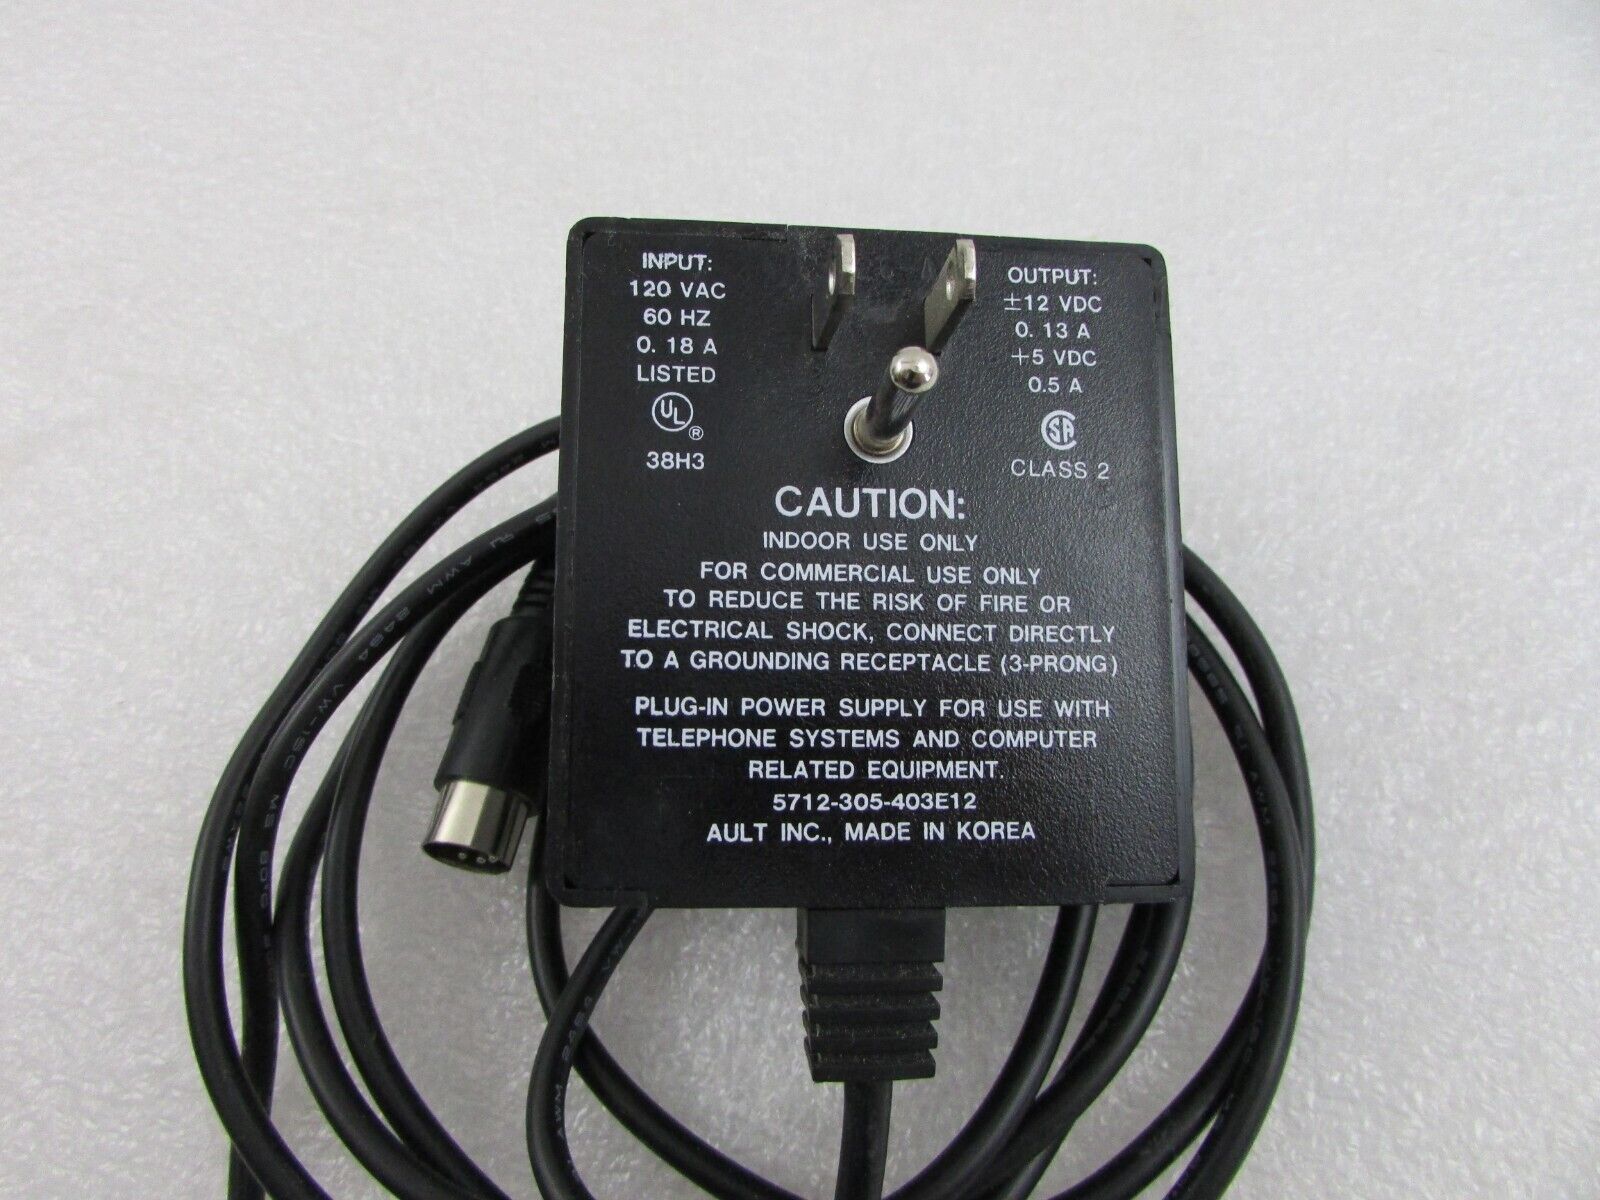 *Brand NEW* AULT 5712-305-403E12 12V AC Adapter For Use With Tele/Comp Systems Power Supply - Click Image to Close